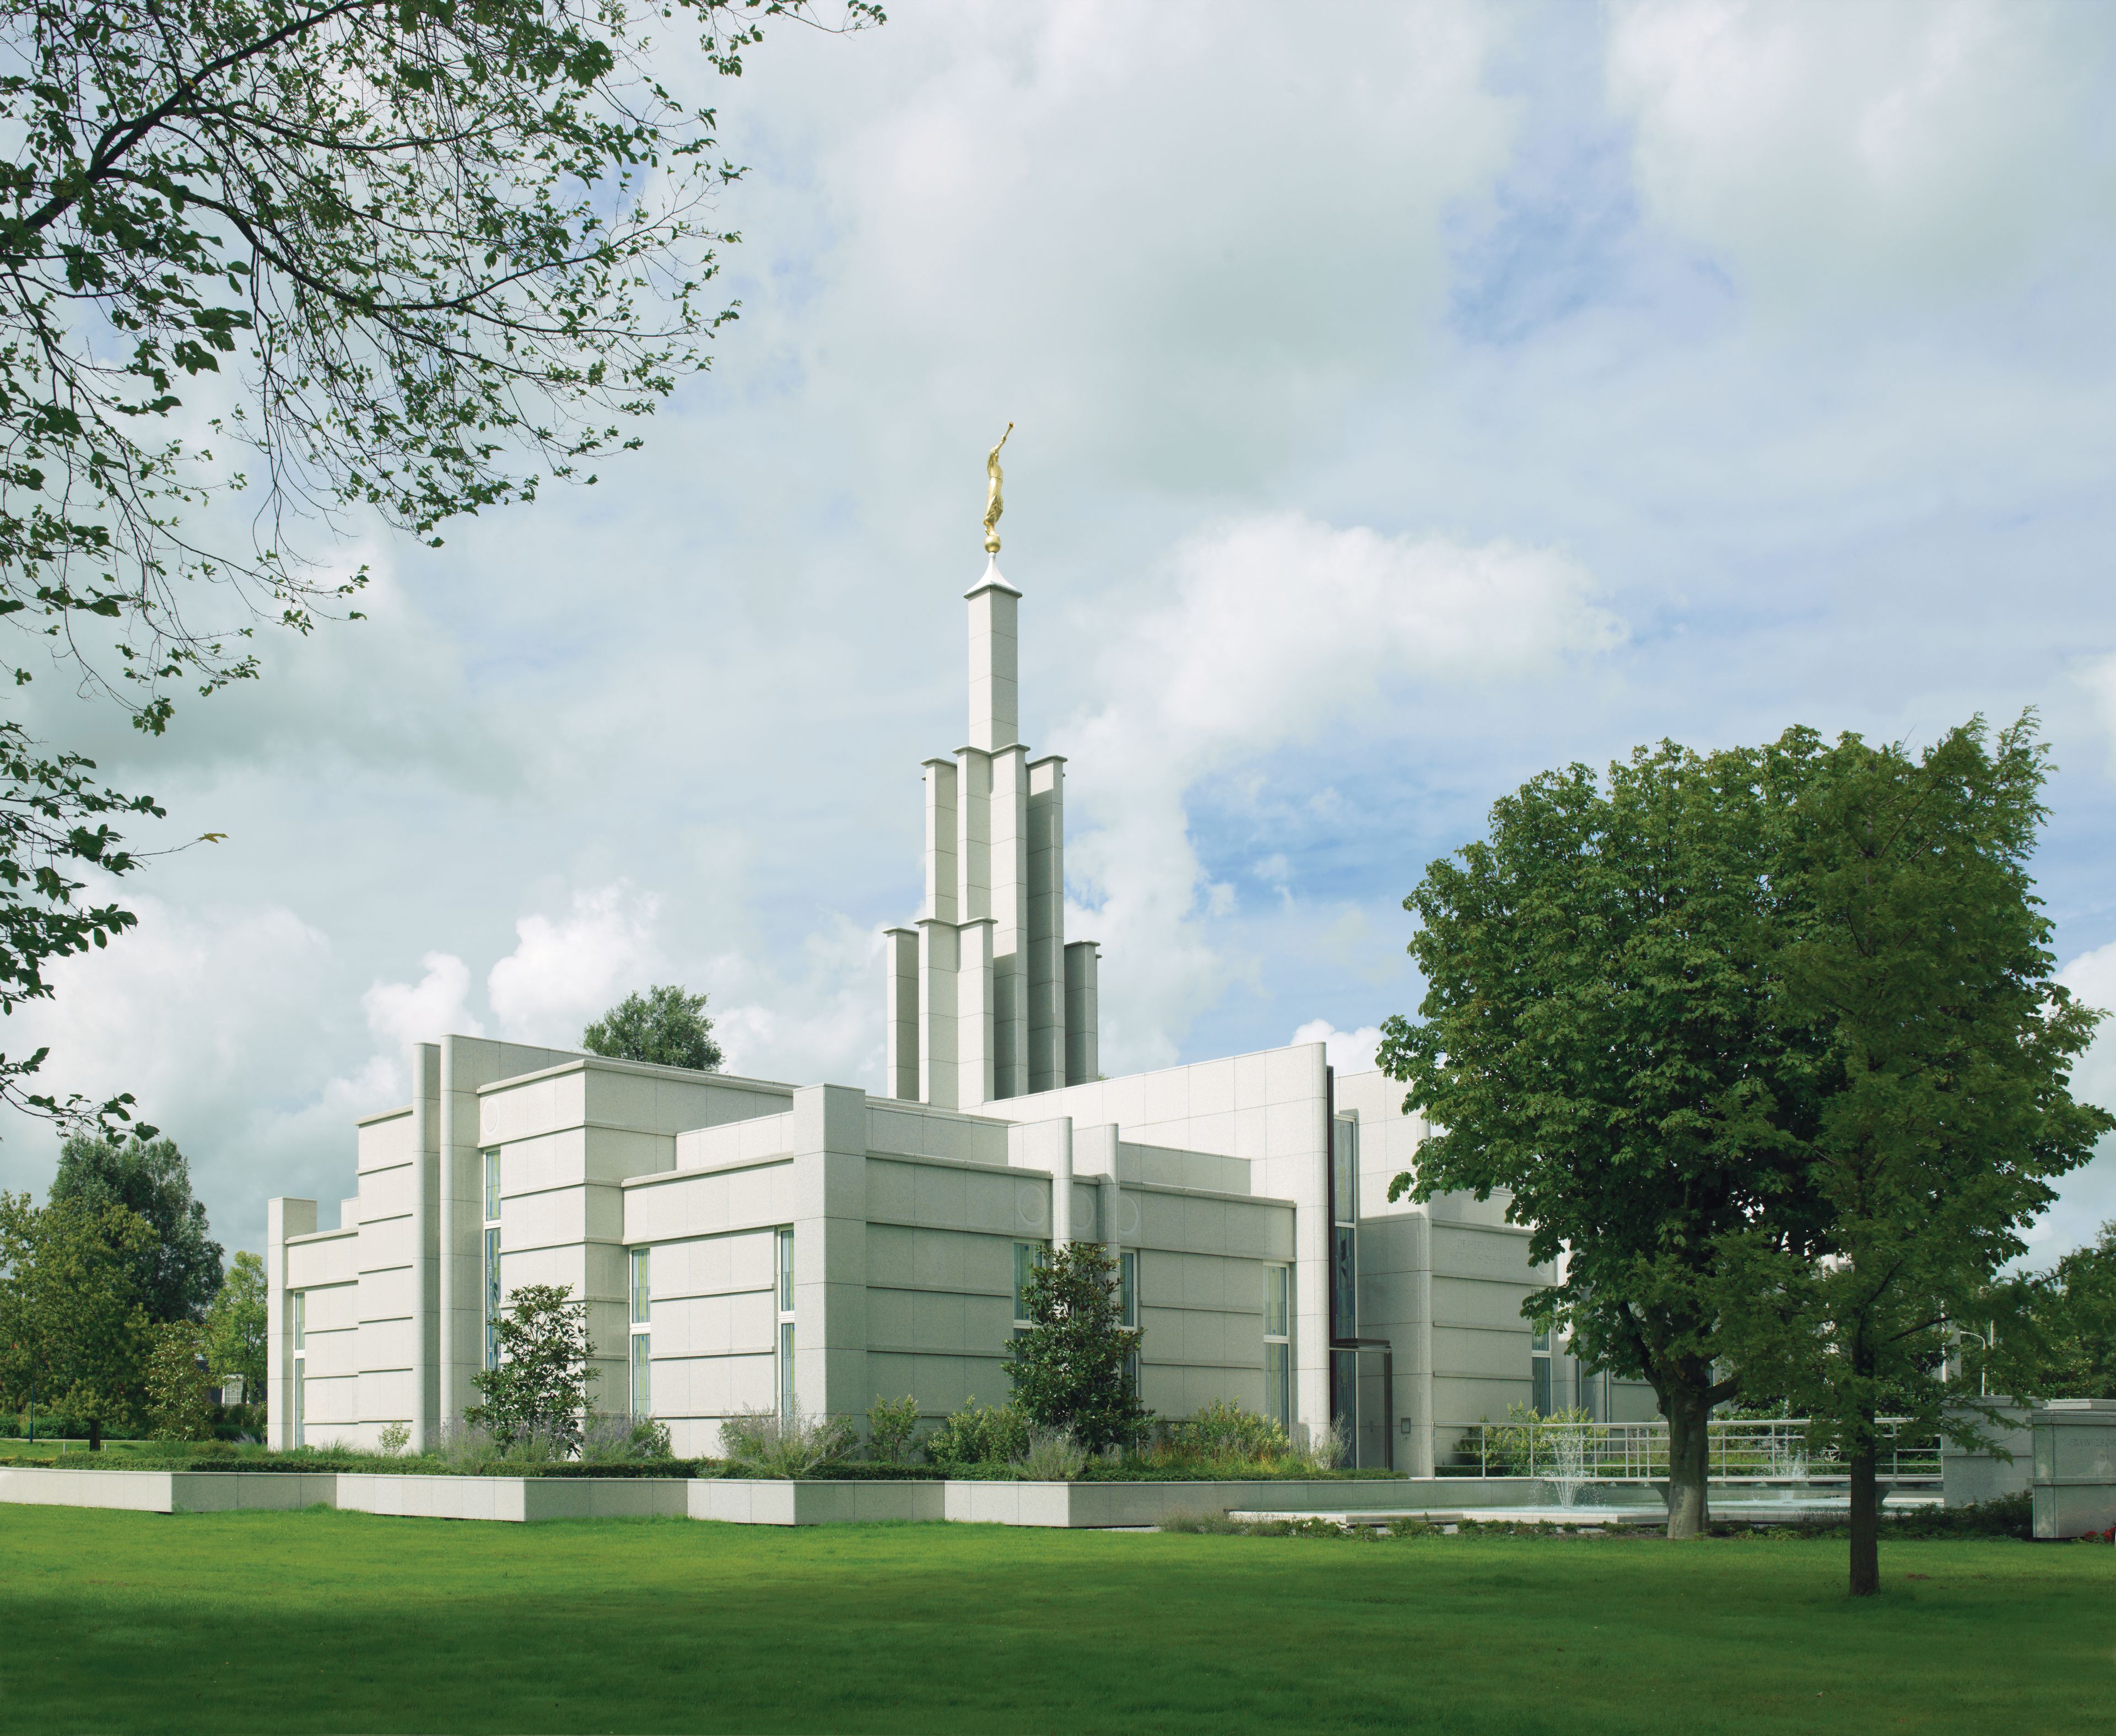 The Hague Netherlands Temple on a cloudy day.